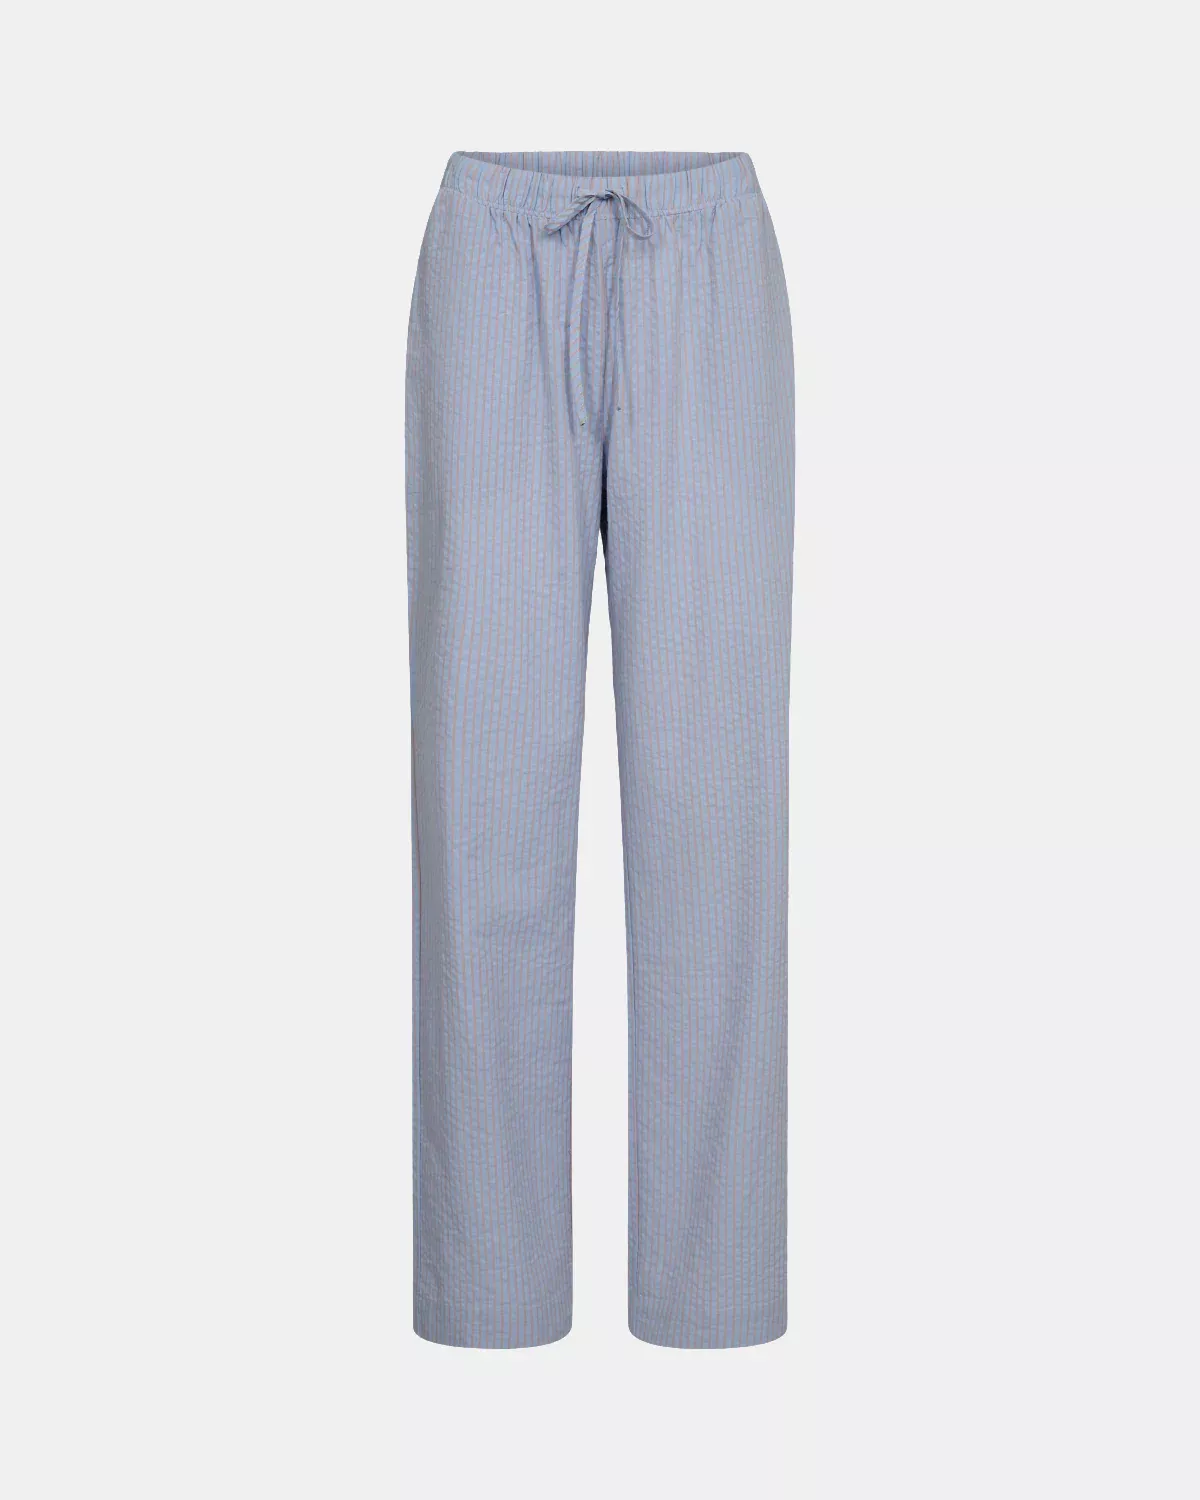 SOFIE SCHNOOR TROUSERS STRIPED